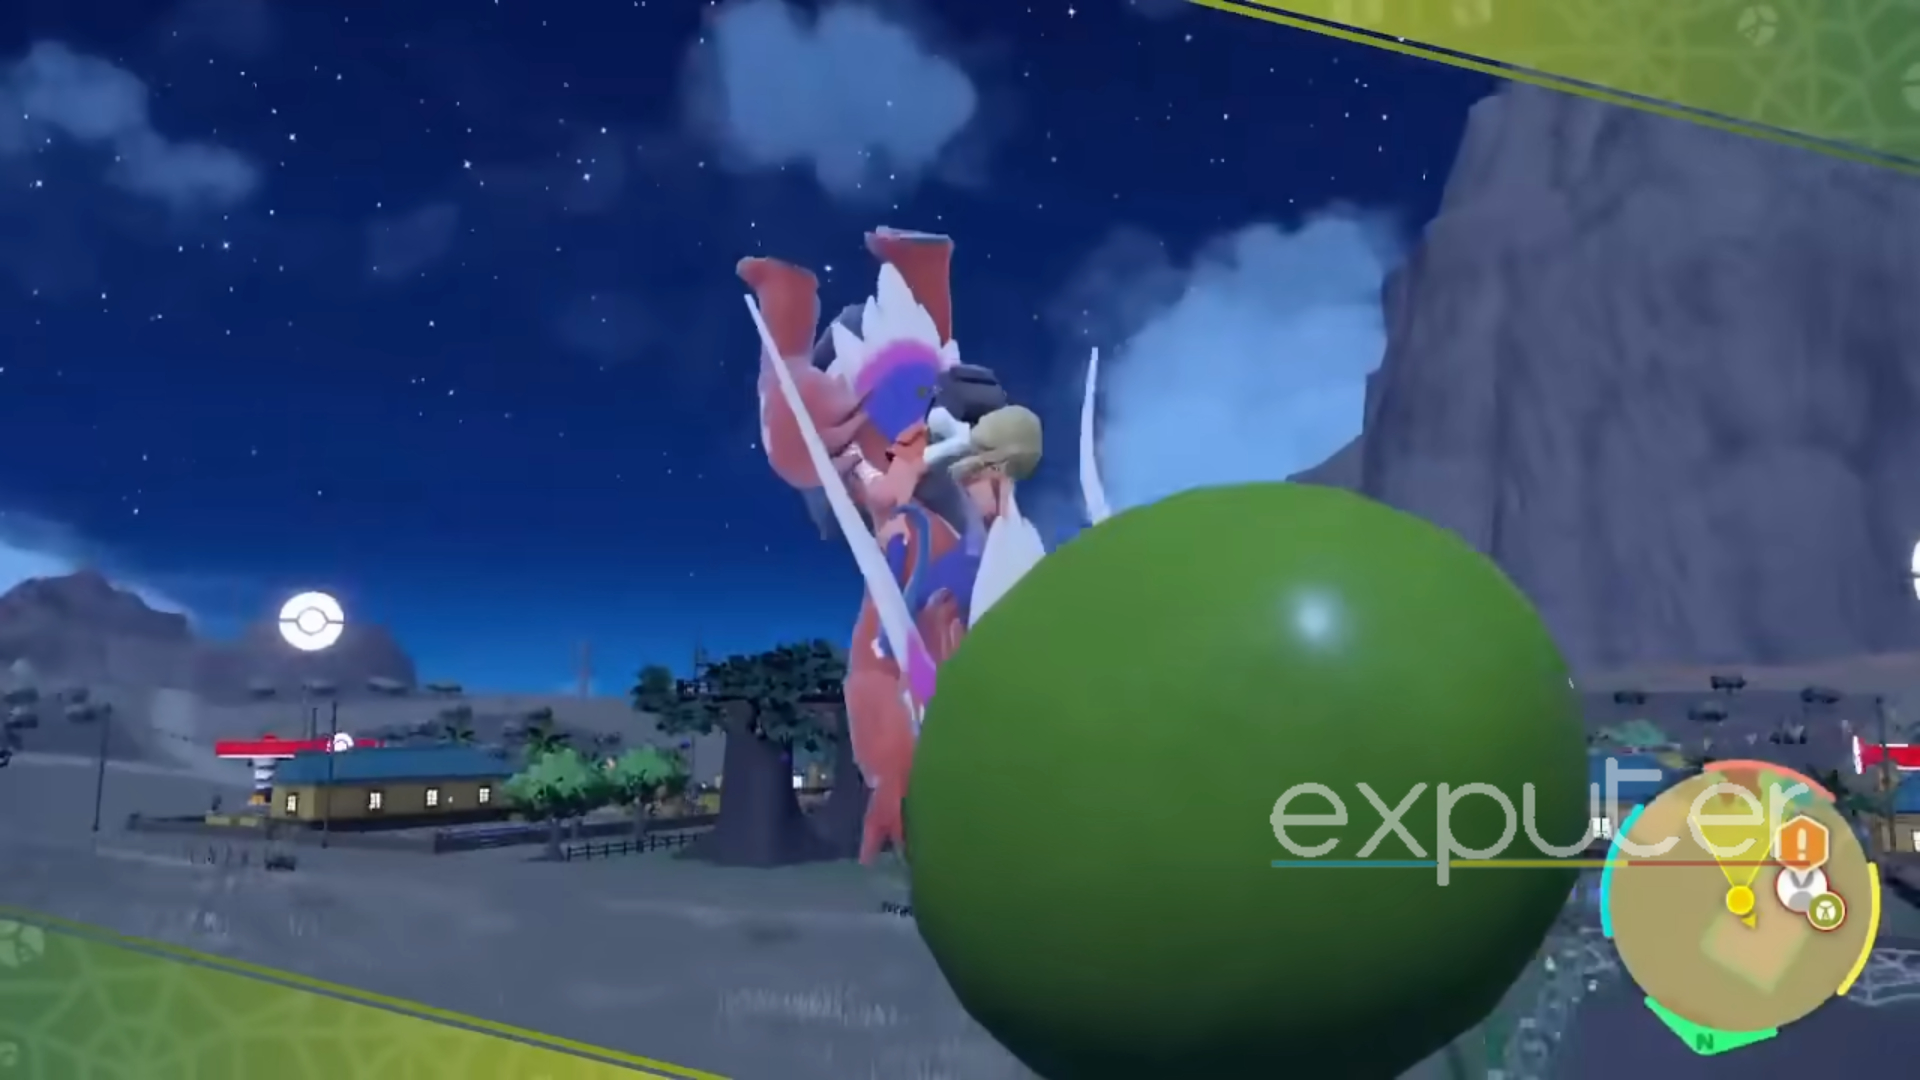 your mount is clipped into a green ball